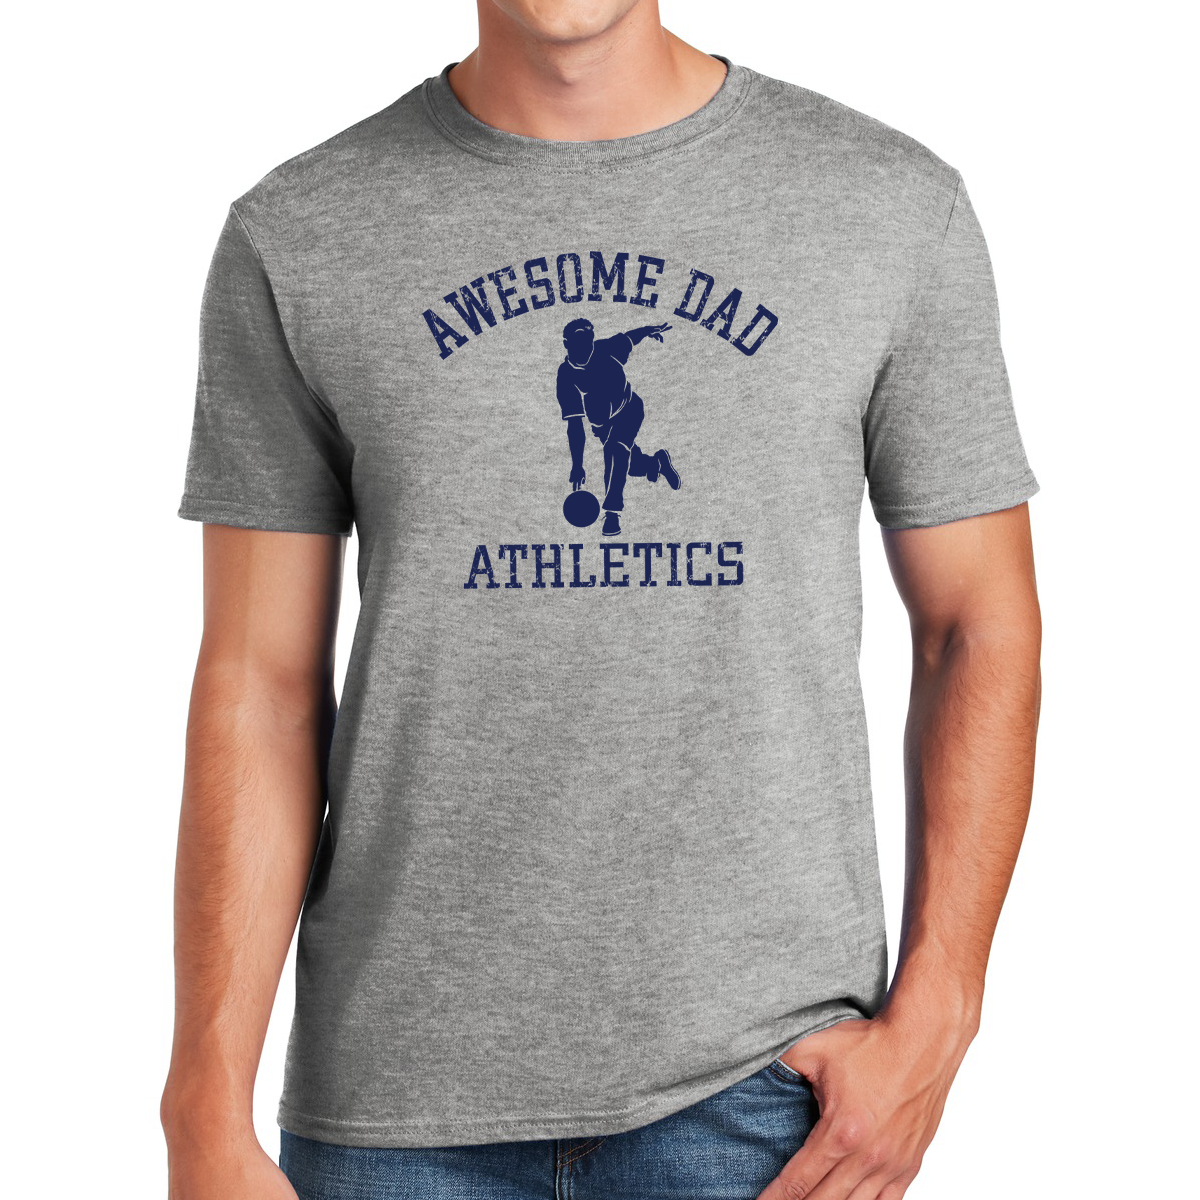 Awesome Dad Athletics Bowler Rolling Strikes in Style Gifts for Dads T-shirt